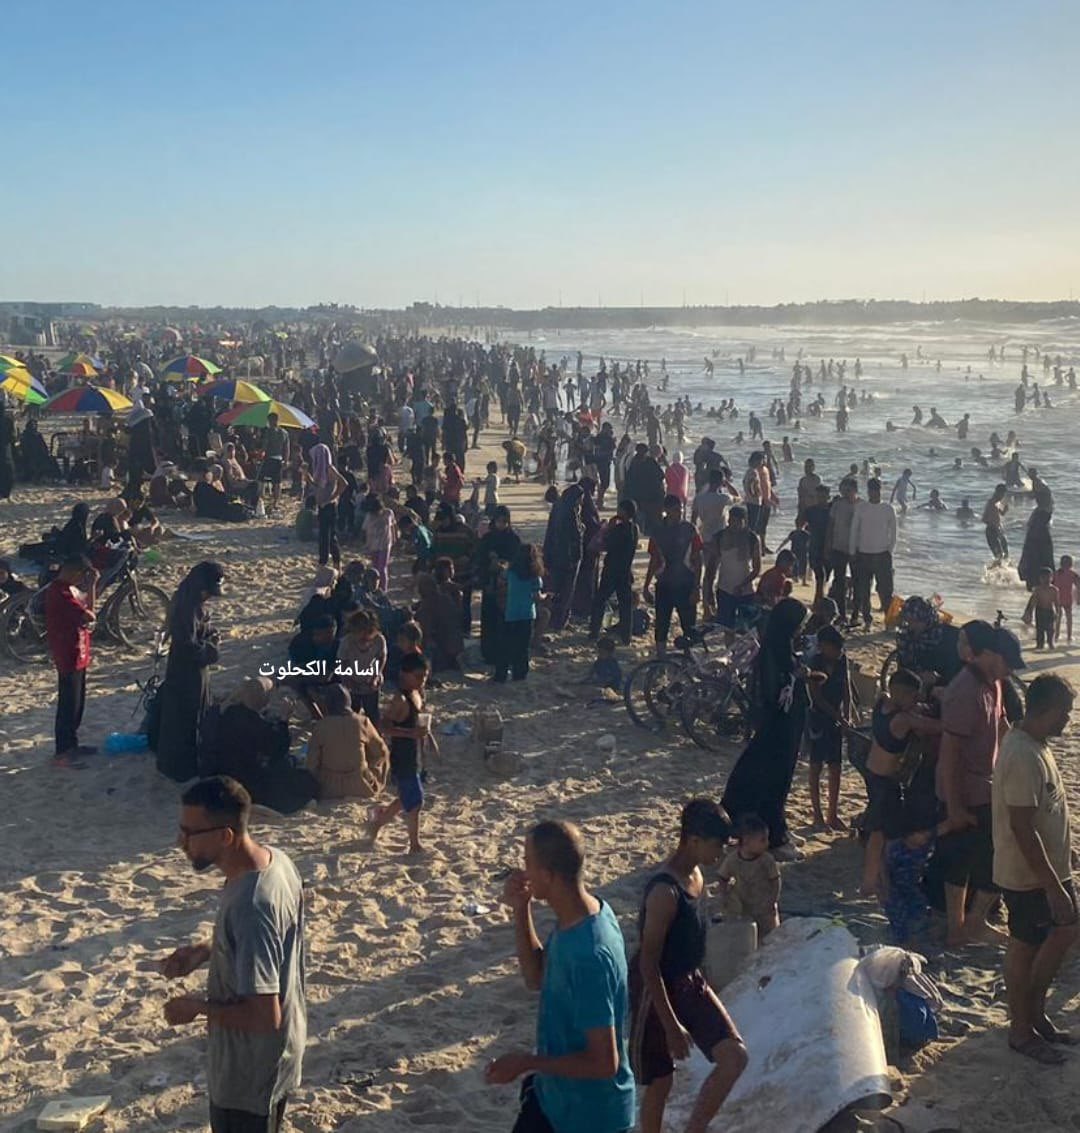 This is how Israel's genocide of Palestinians looks like in Gaza beach today 👇